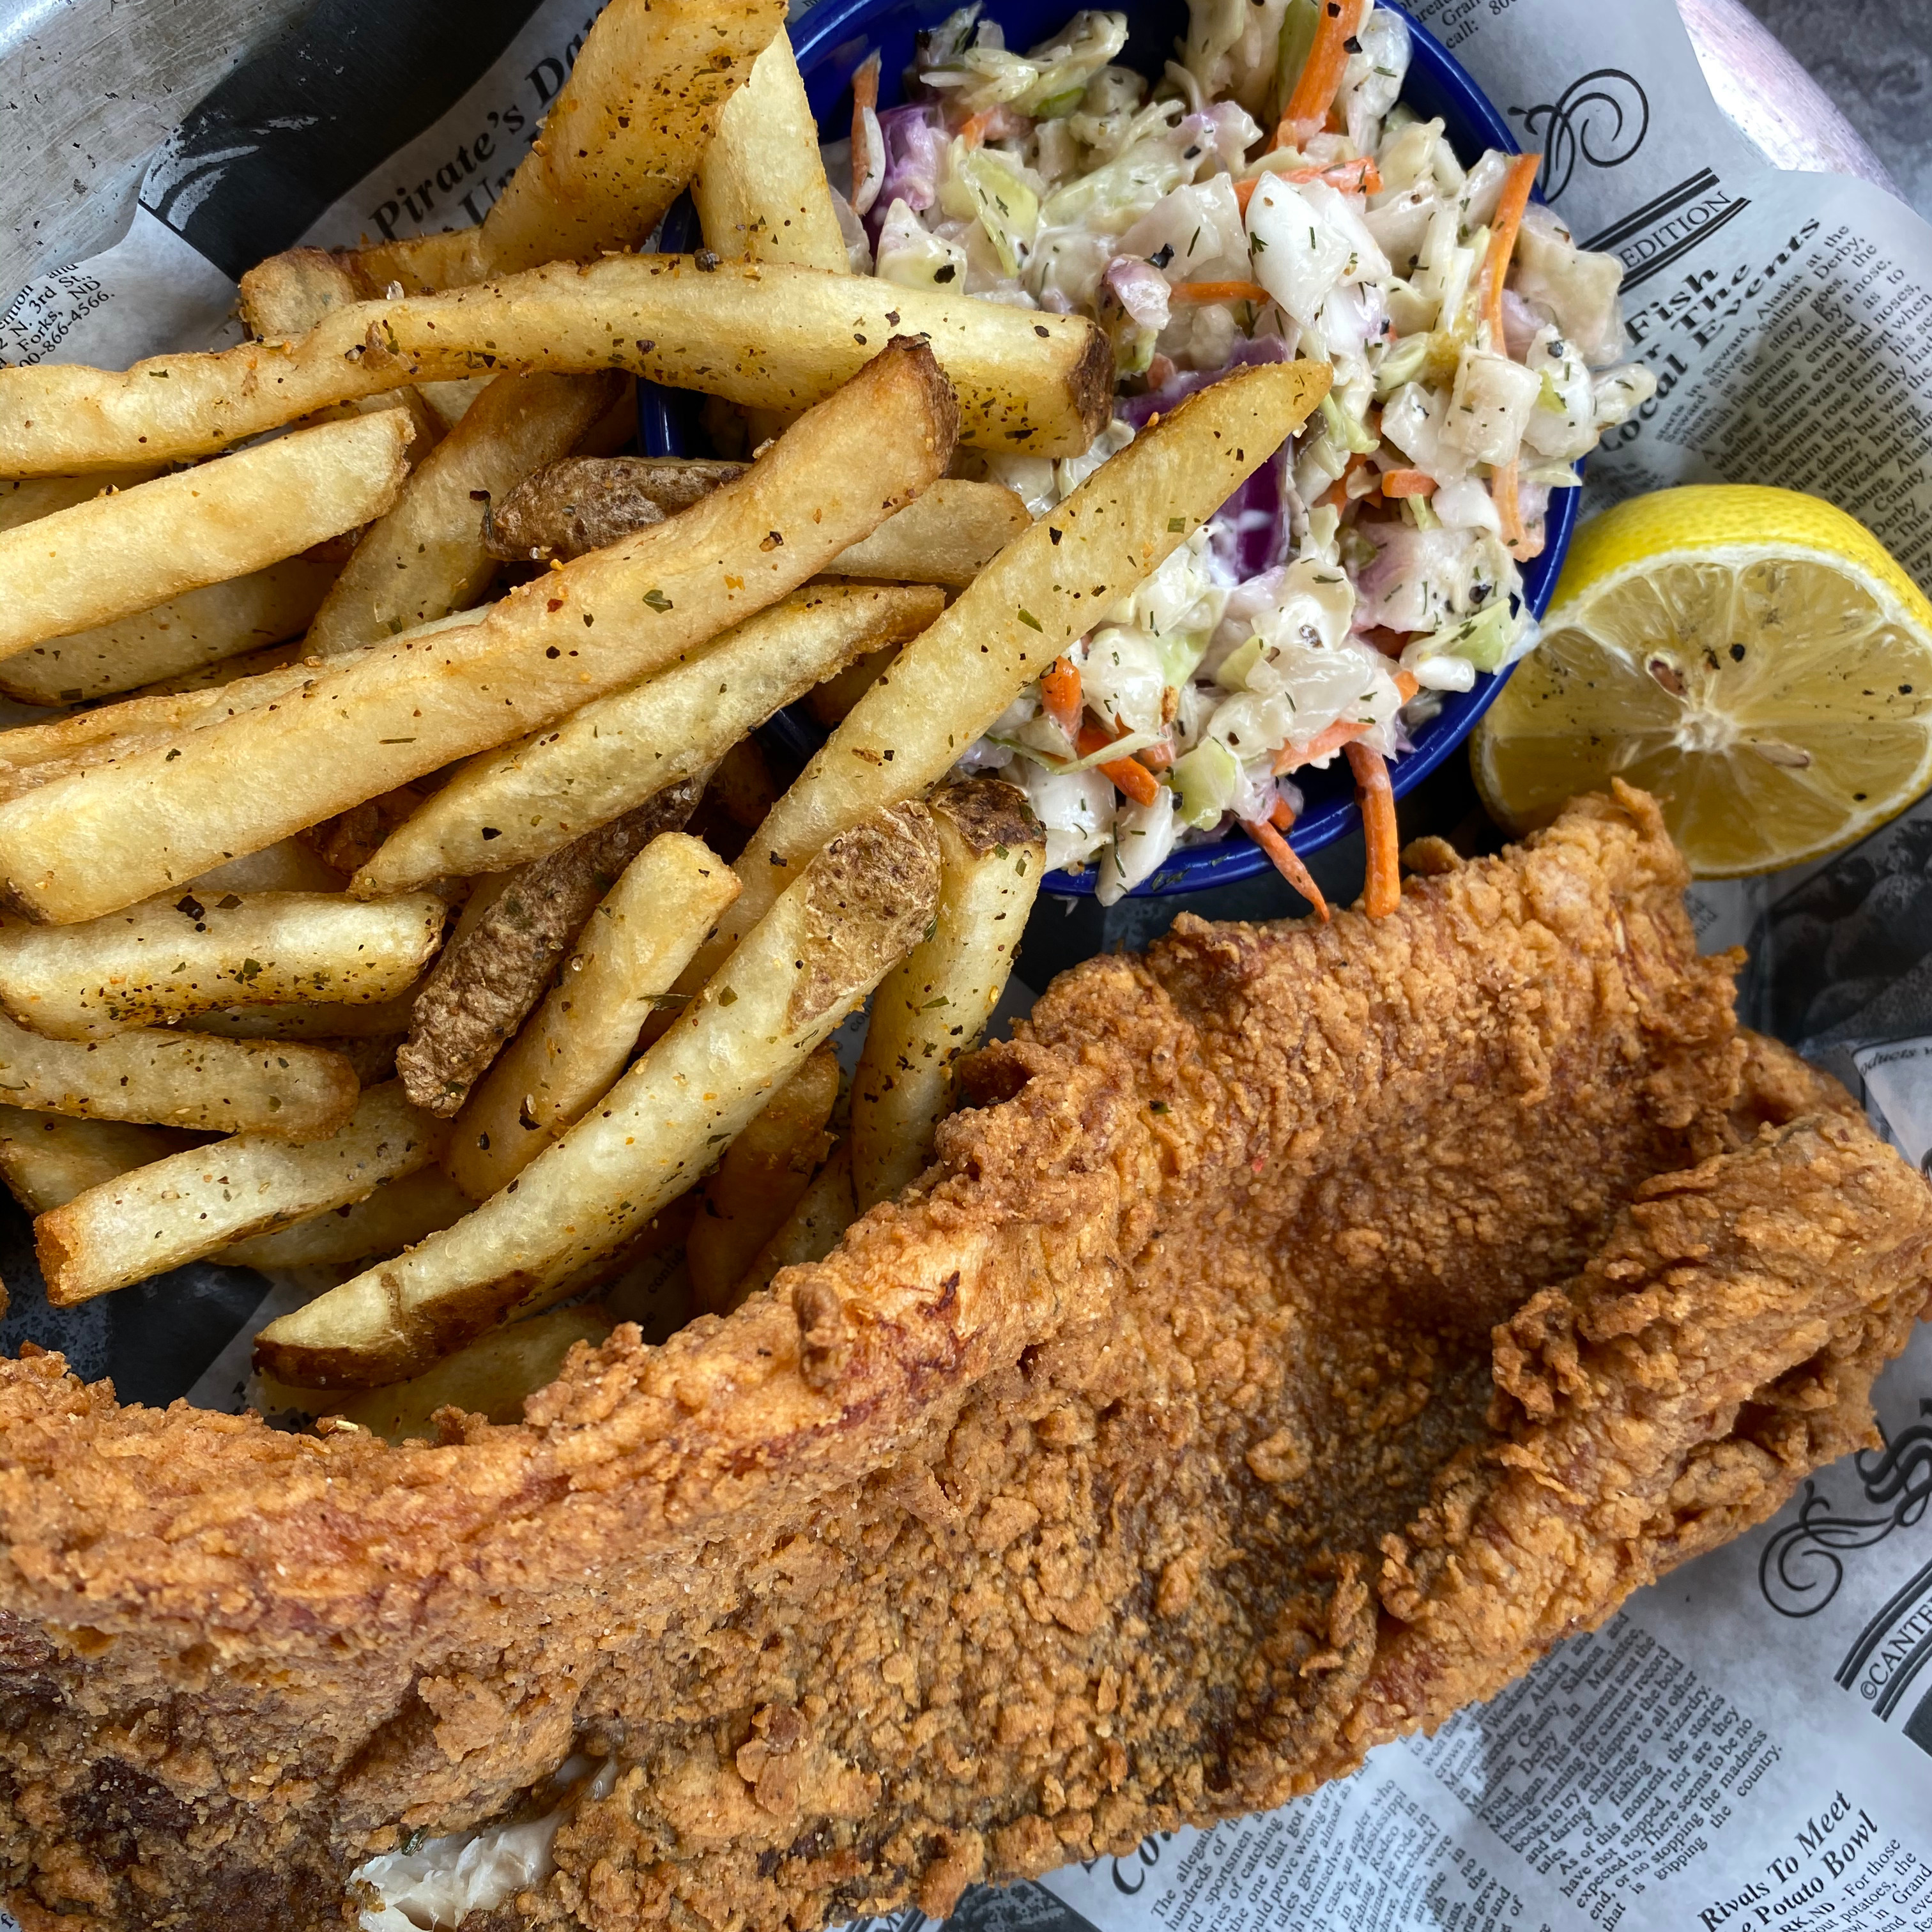 At the [Blu-moon Bistro](https://www.blumoonbistro.com) in Ludington, Michigan, Lake Whitefish was the catch of the day. Photo taken and fish eaten by Rob Wiederstein.